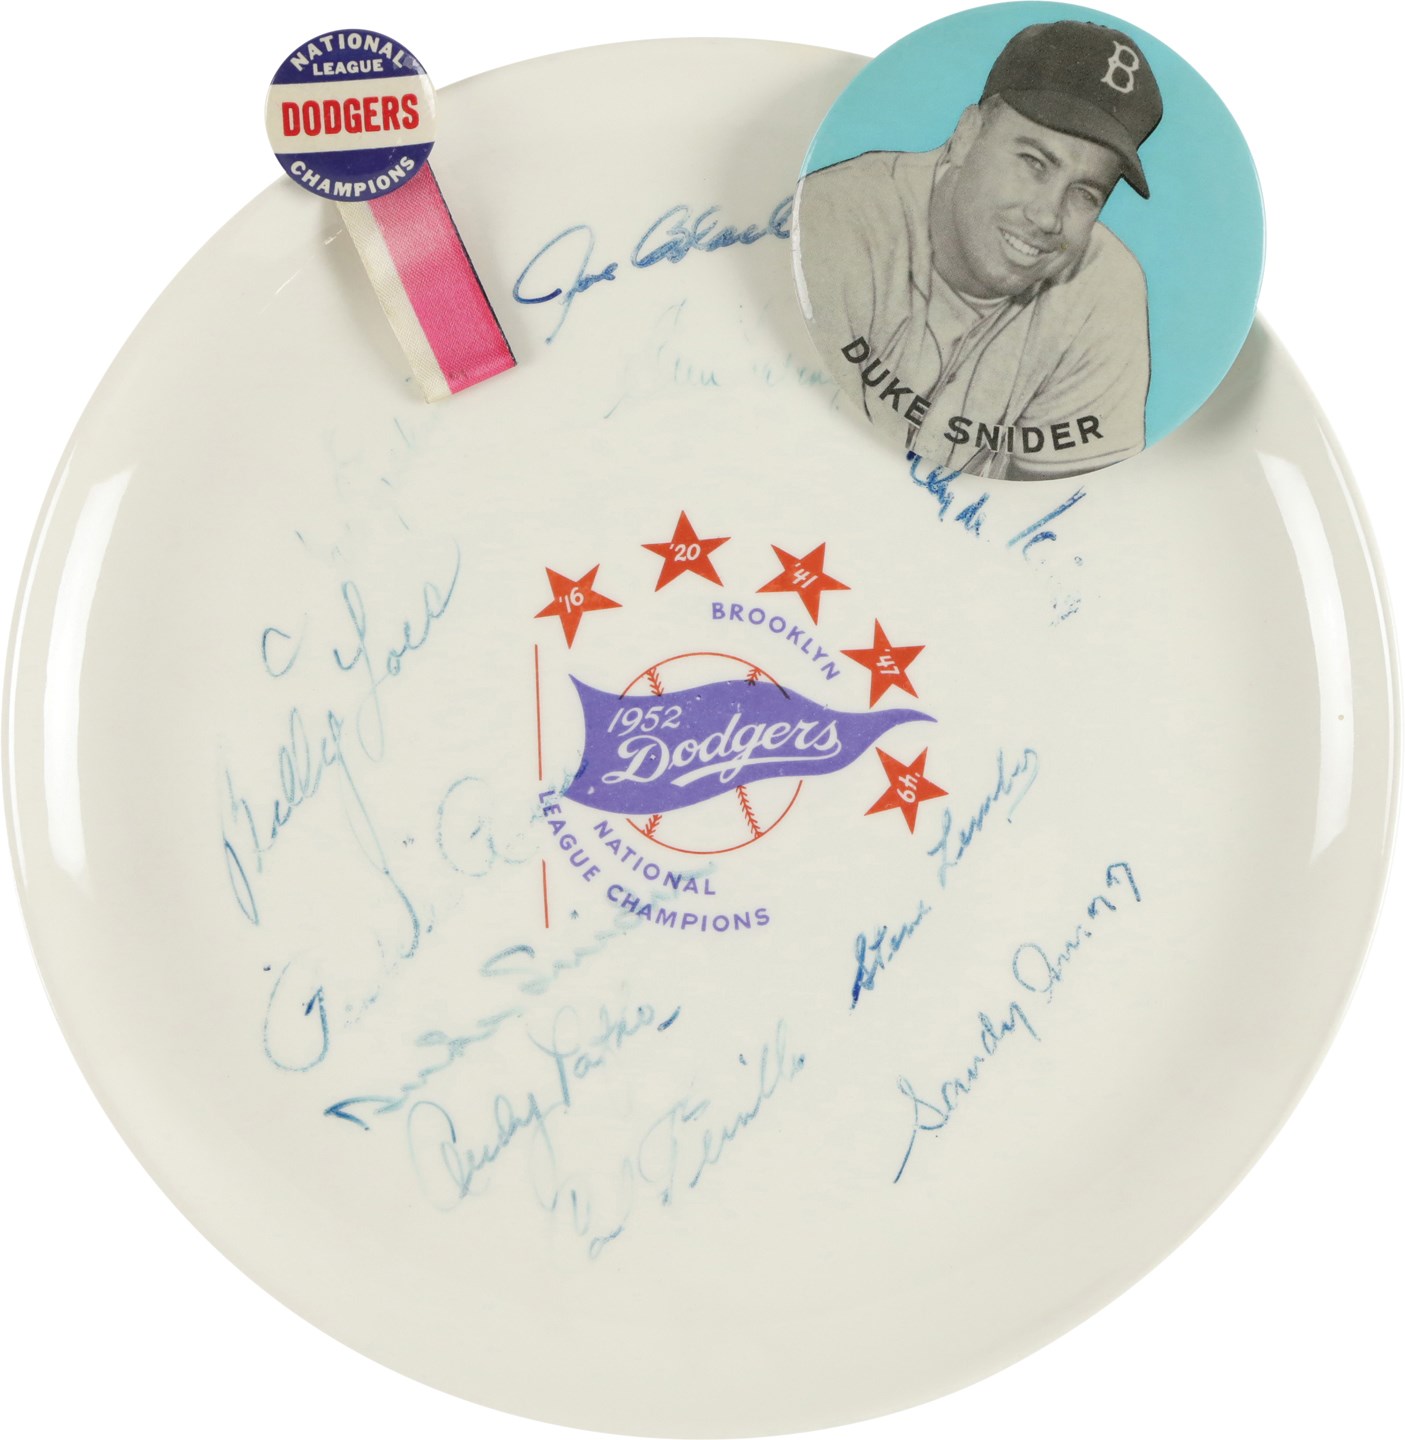 - Vintage 1952 Brooklyn Dodgers Commemorative Plate Signed by 11 Team Members Including Snider, Reese & Furillo (PSA)